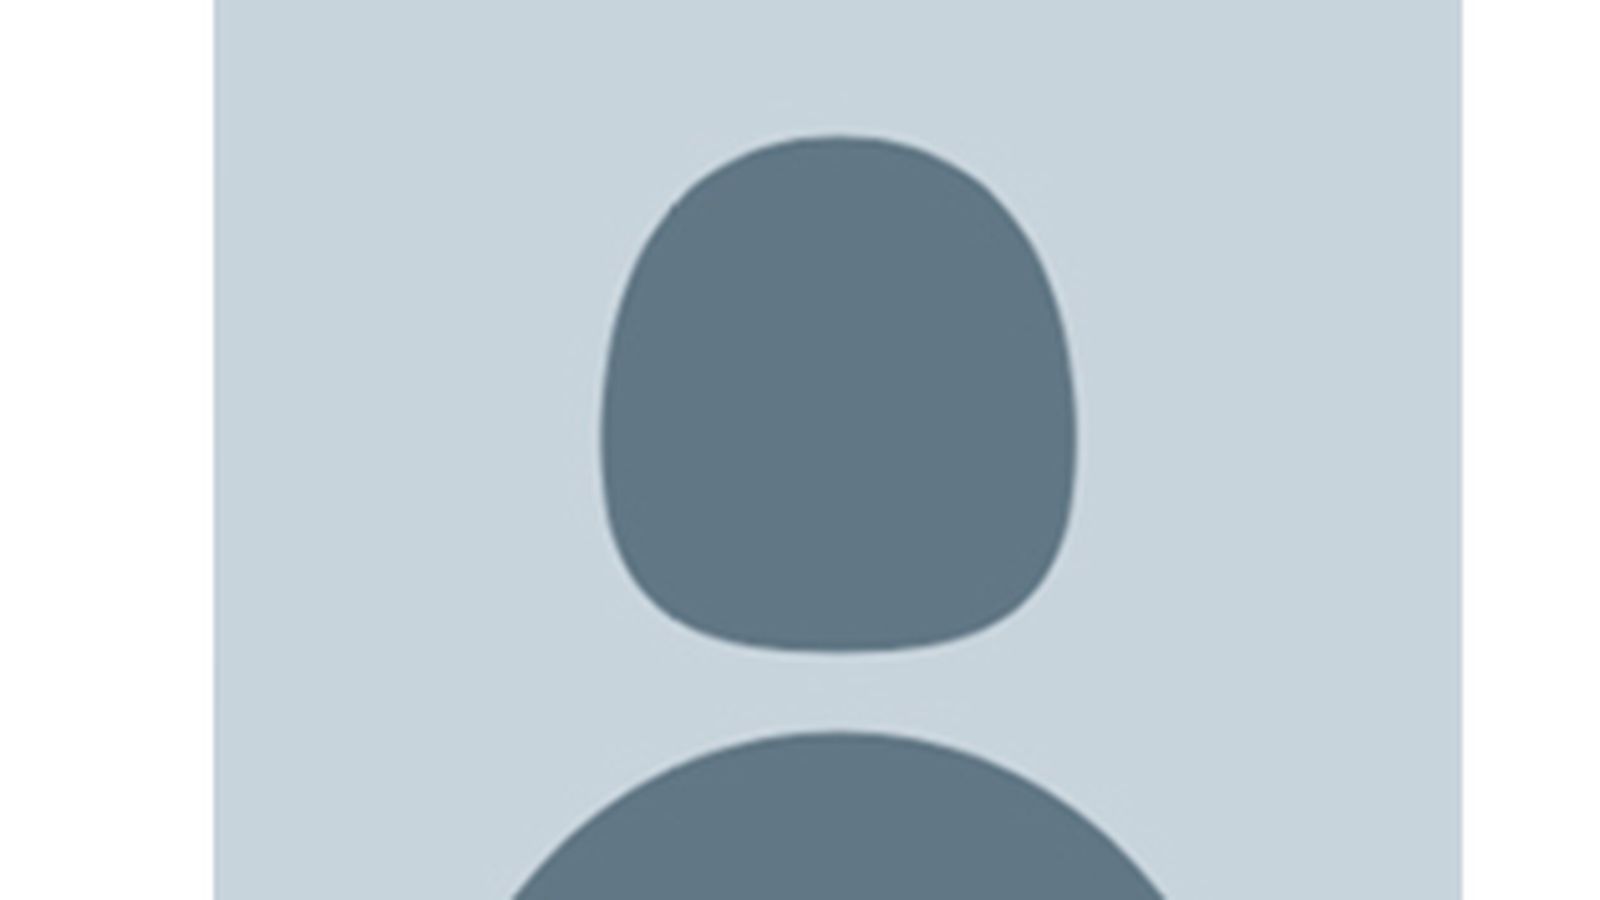 Twitter wants you to stop saying 'Twitter eggs'